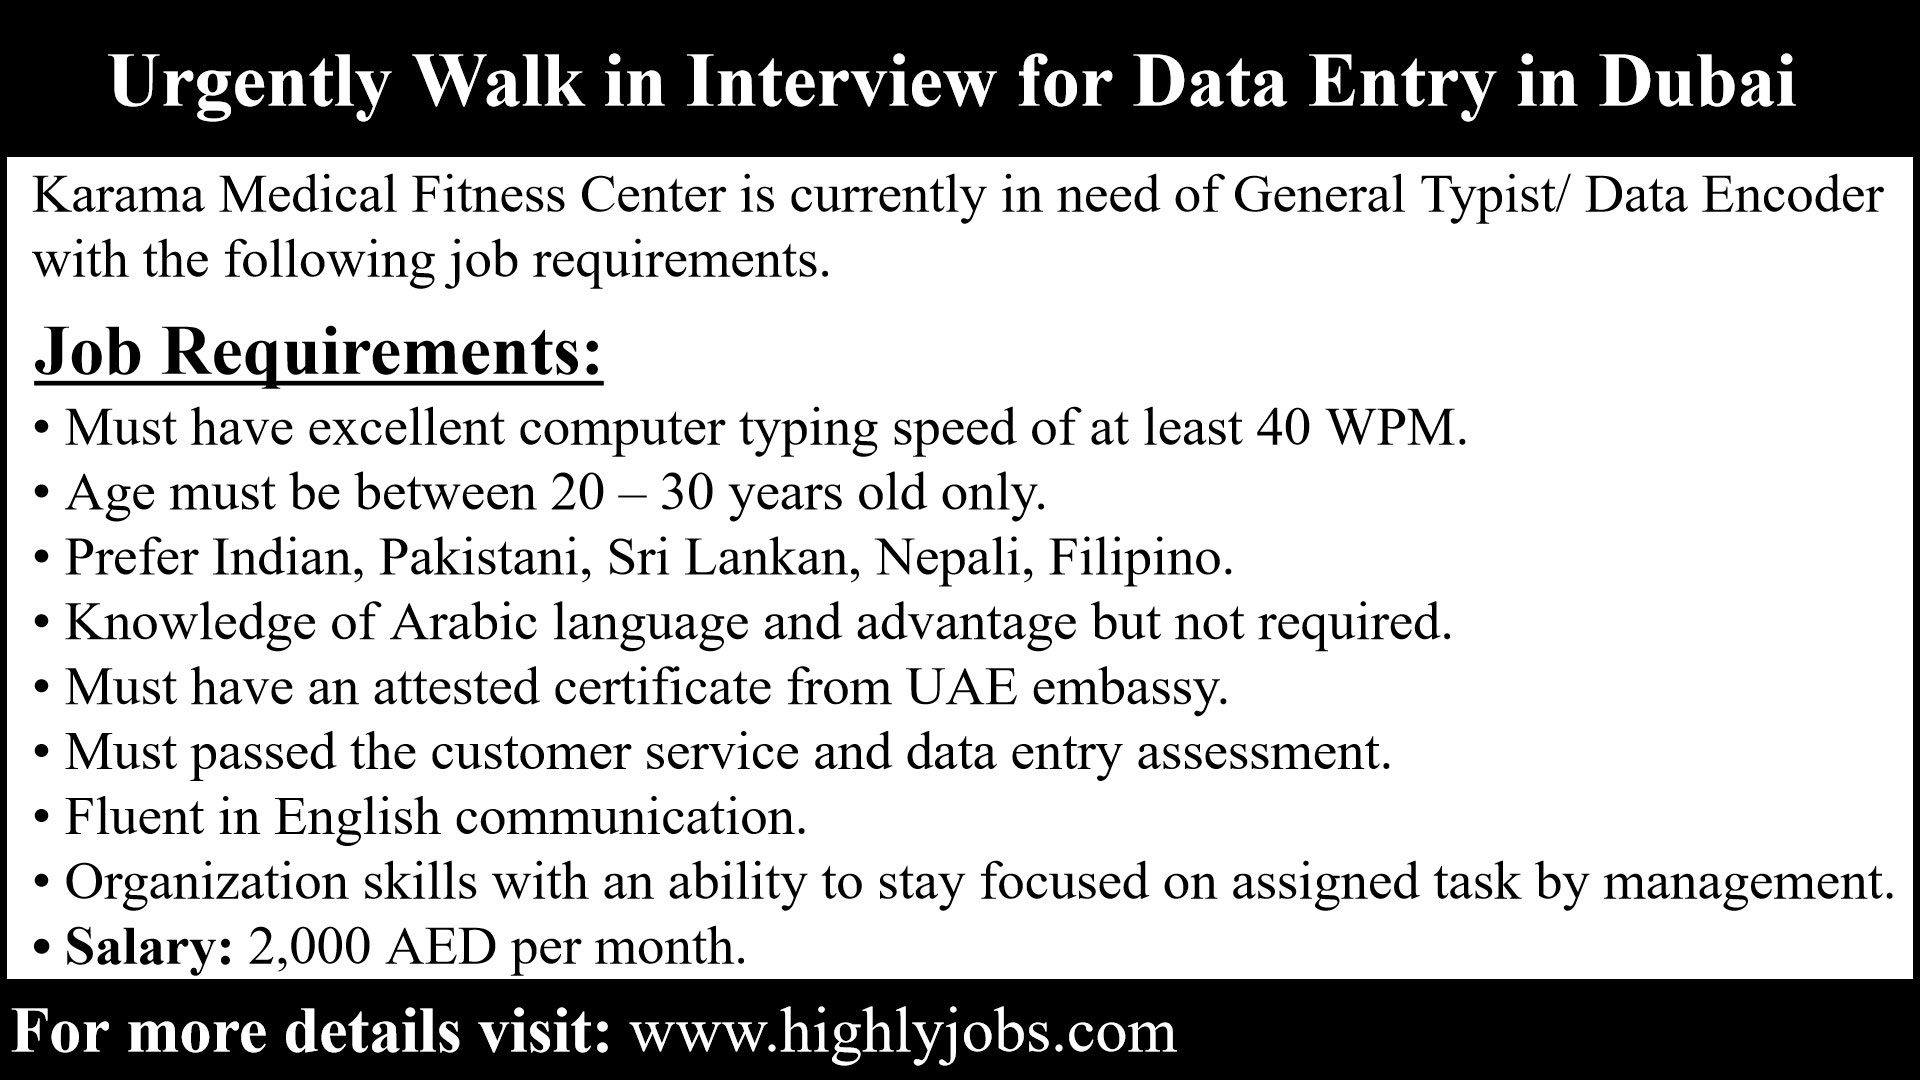 Urgently Walk in Interview for Data Entry in Dubai